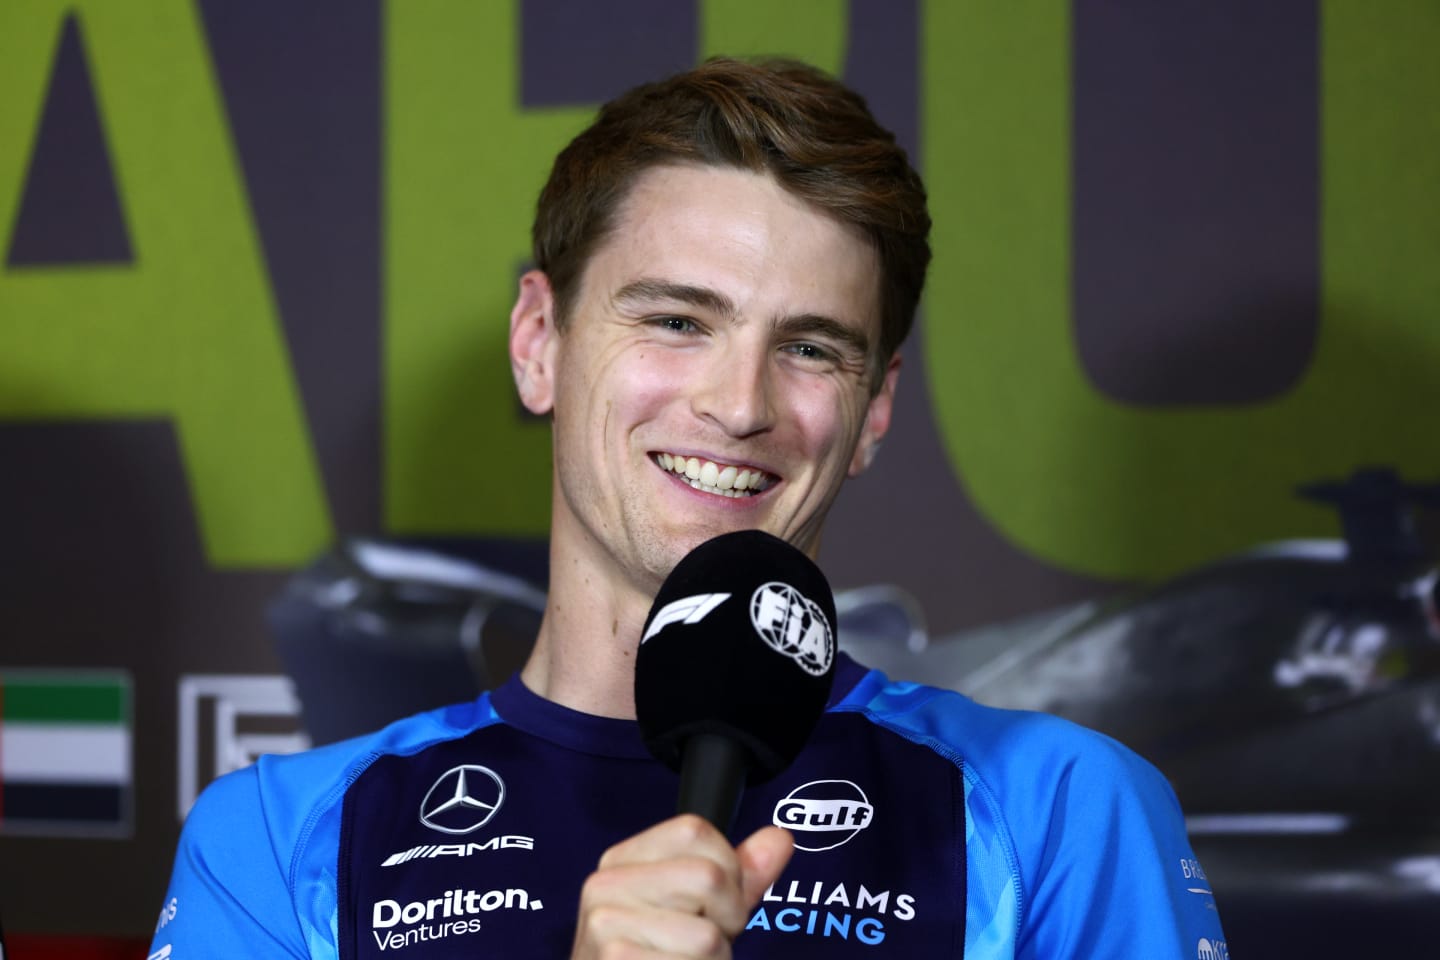 ABU DHABI, UNITED ARAB EMIRATES - NOVEMBER 23: Logan Sargeant of United States and Williams attends the Drivers Press Conference during previews ahead of the F1 Grand Prix of Abu Dhabi at Yas Marina Circuit on November 23, 2023 in Abu Dhabi, United Arab Emirates. (Photo by Clive Rose/Getty Images)